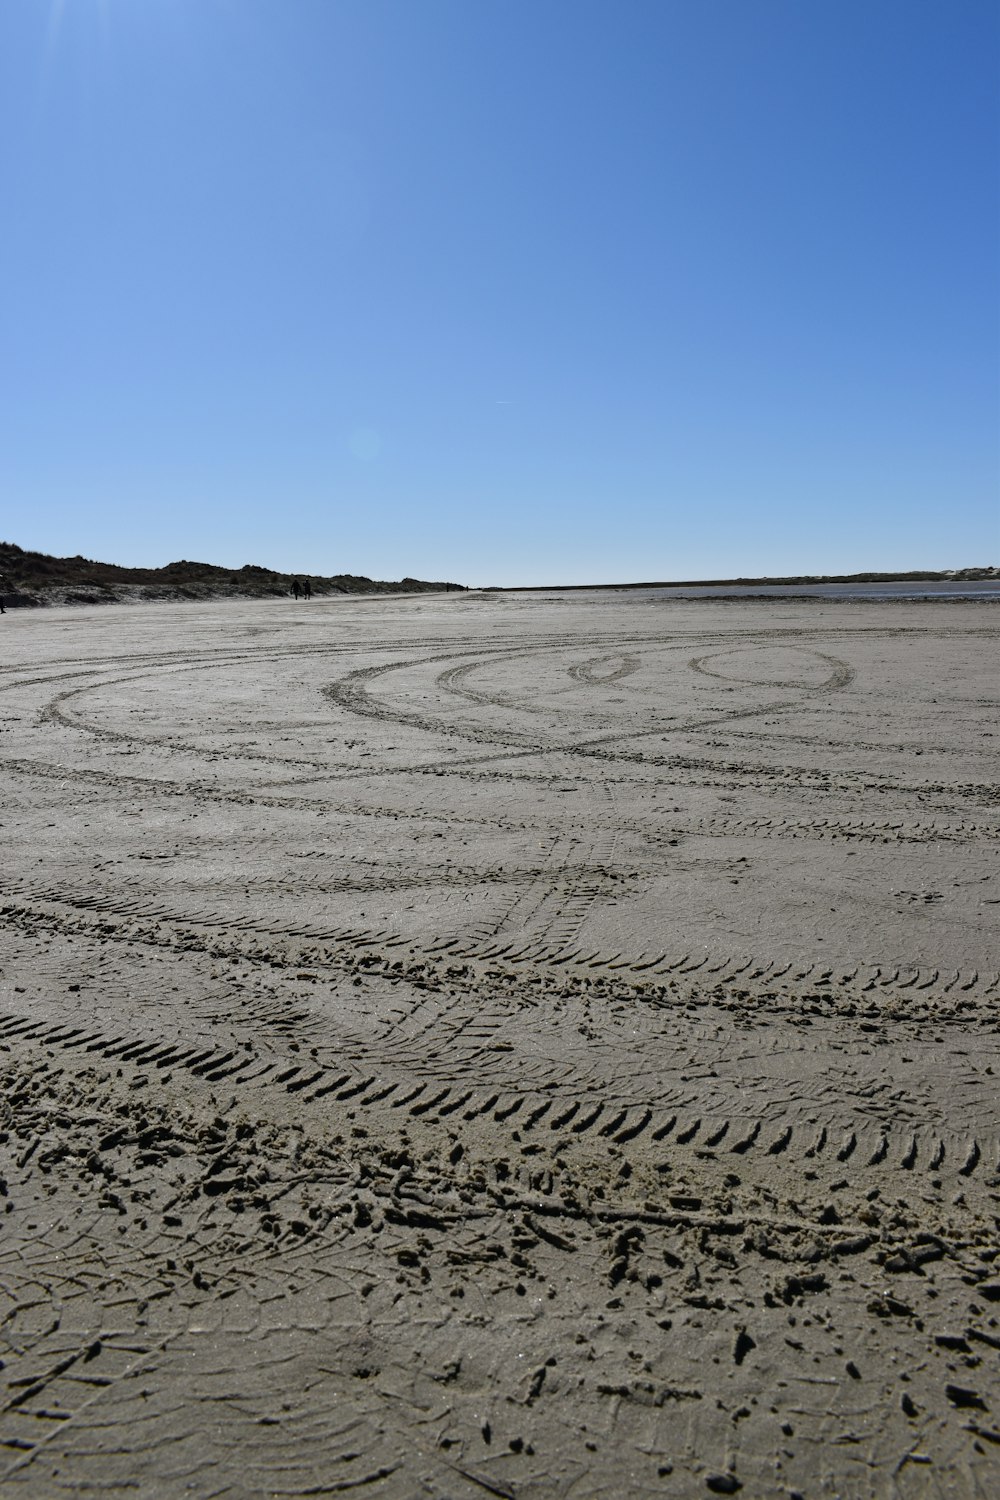 a tire track in the sand on a beach